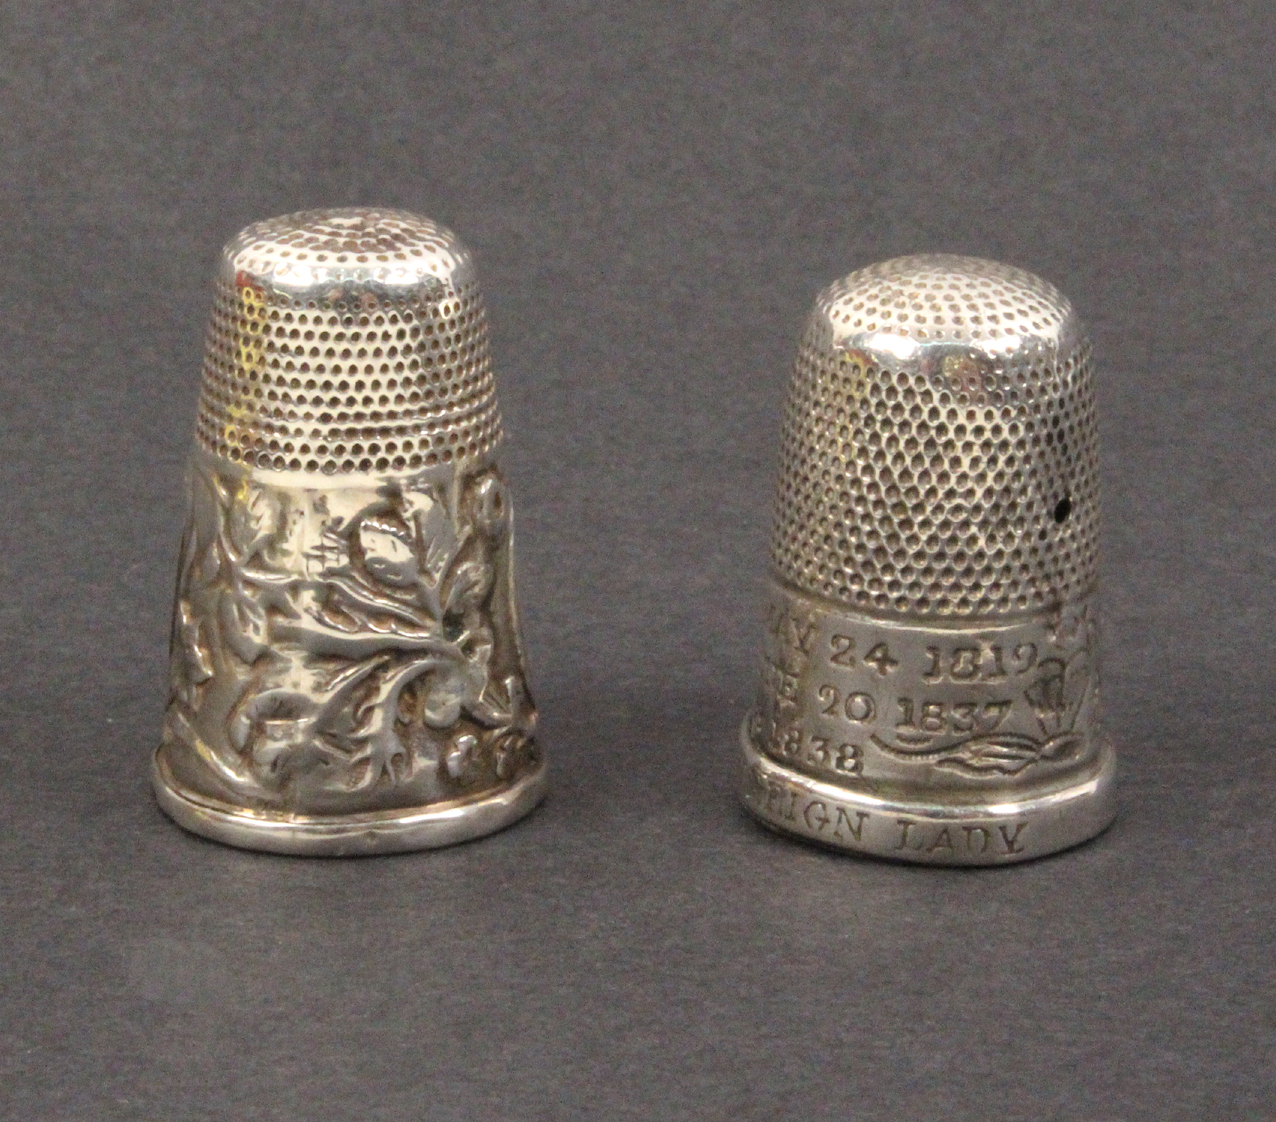 Two English silver commemorative thimbles, one with oval portrait medallions of Queen Victoria and - Image 2 of 2